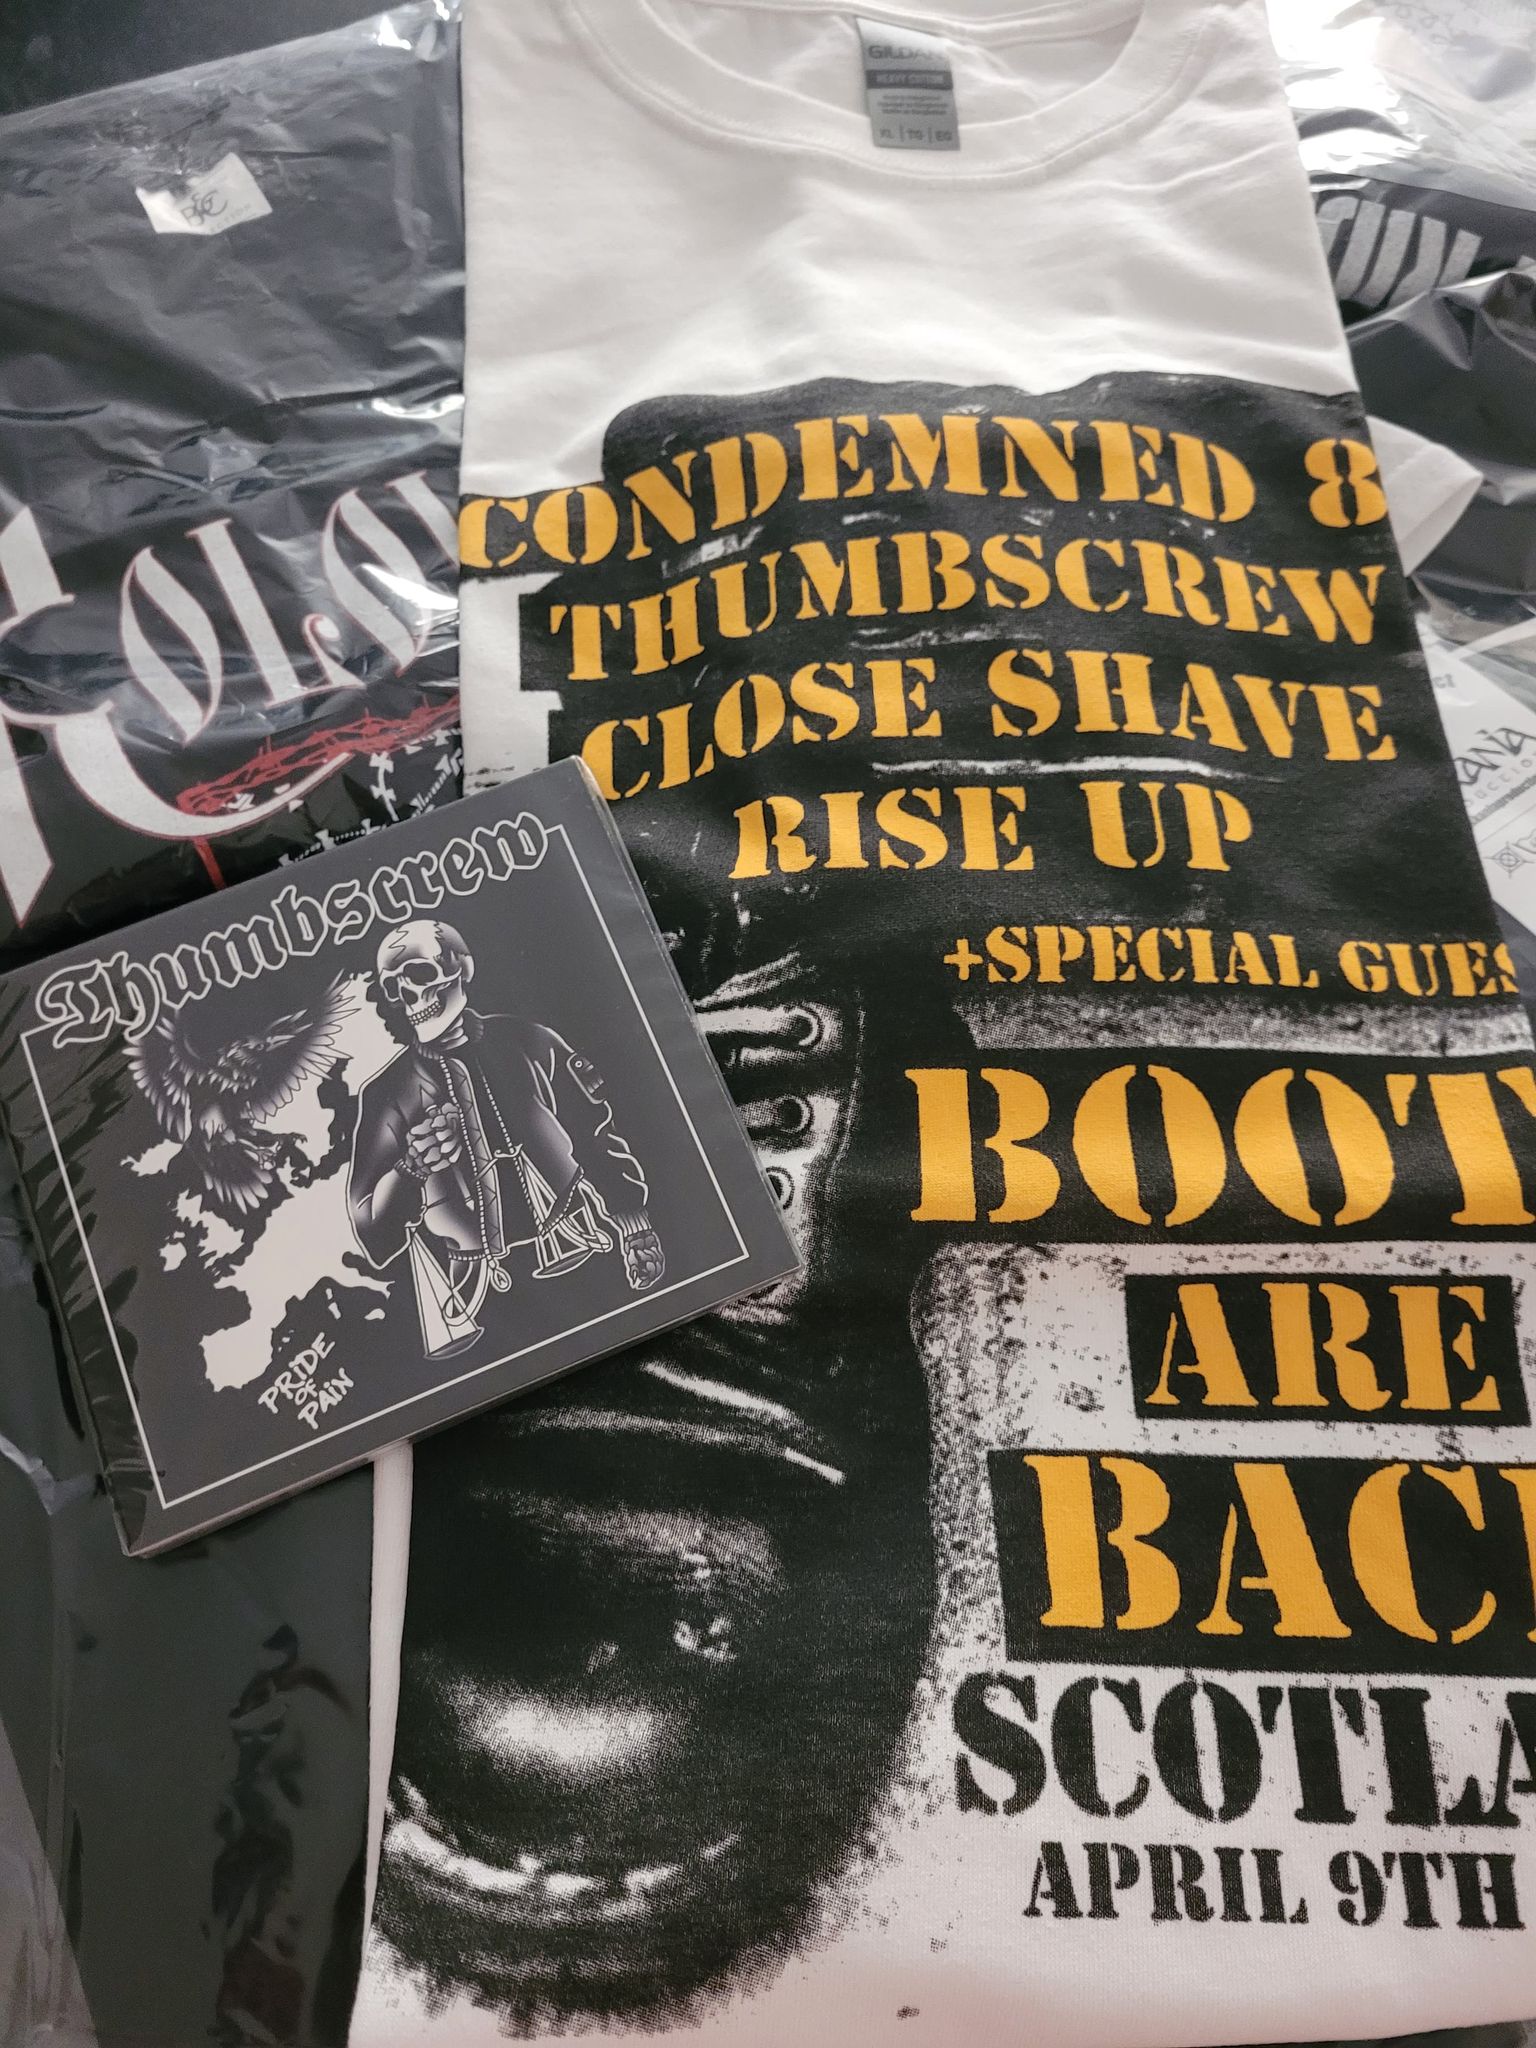 Boots Are Back T-shirt + Thumbscrew CD bundle